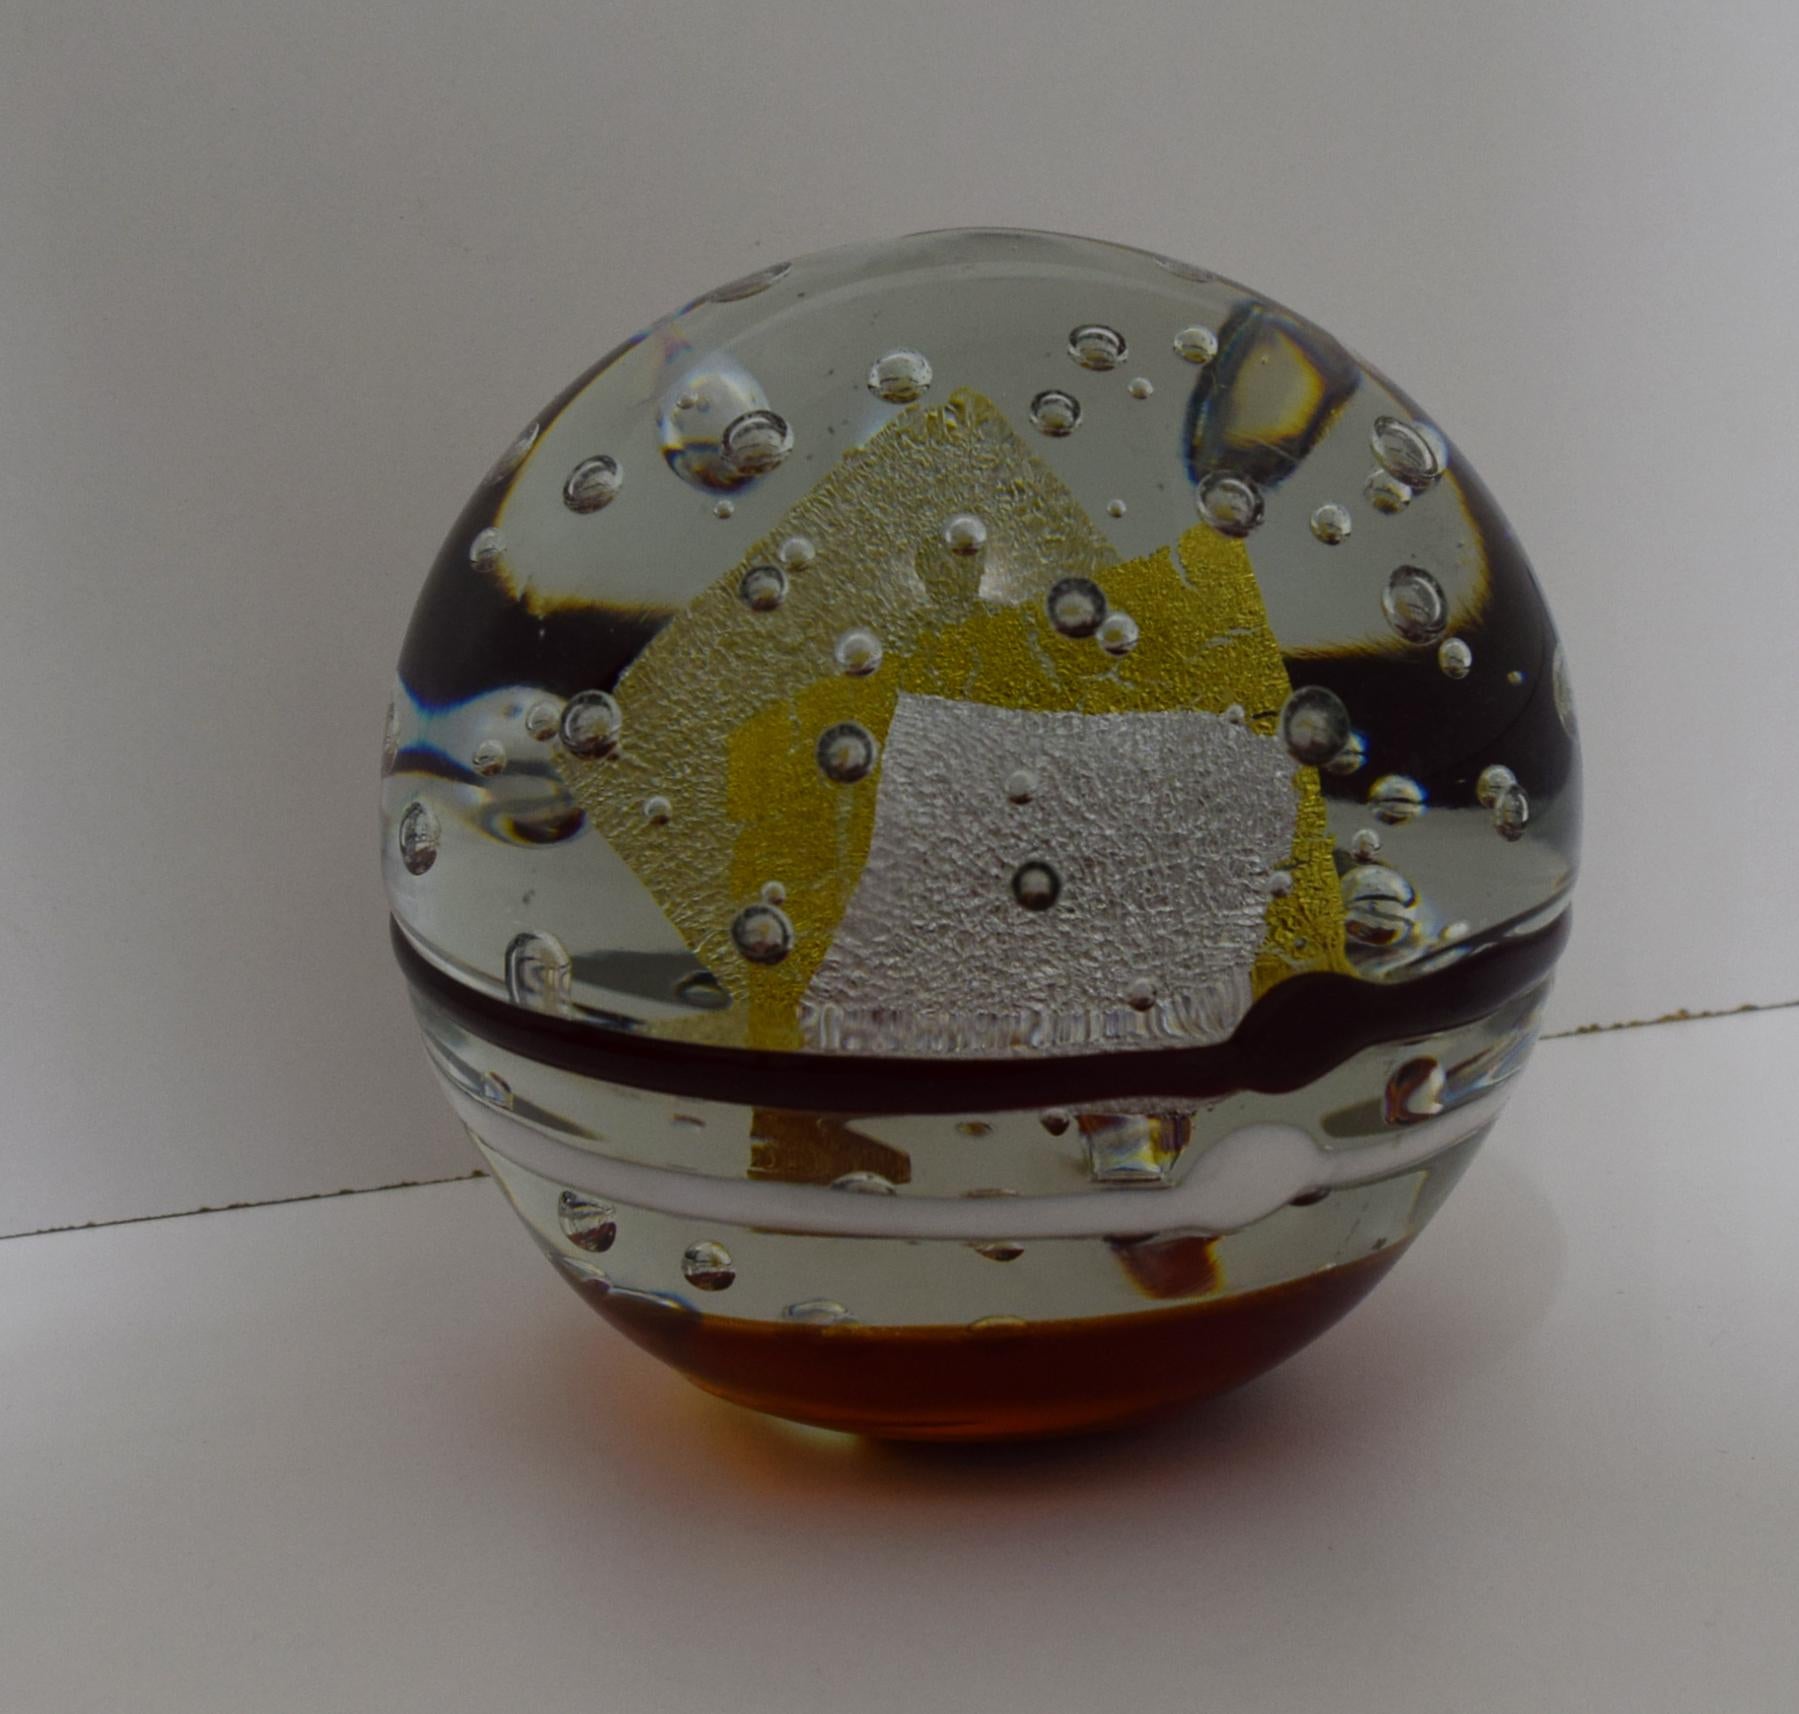 USA, 1980s large sphere glass tabletop or mantel (fireplace) sculpture by studio artist Robert L. Hamon. Hamon glass produced paperweights and on occasion would produce very large and heavy art glass pieces like paperweights, but in this size. In